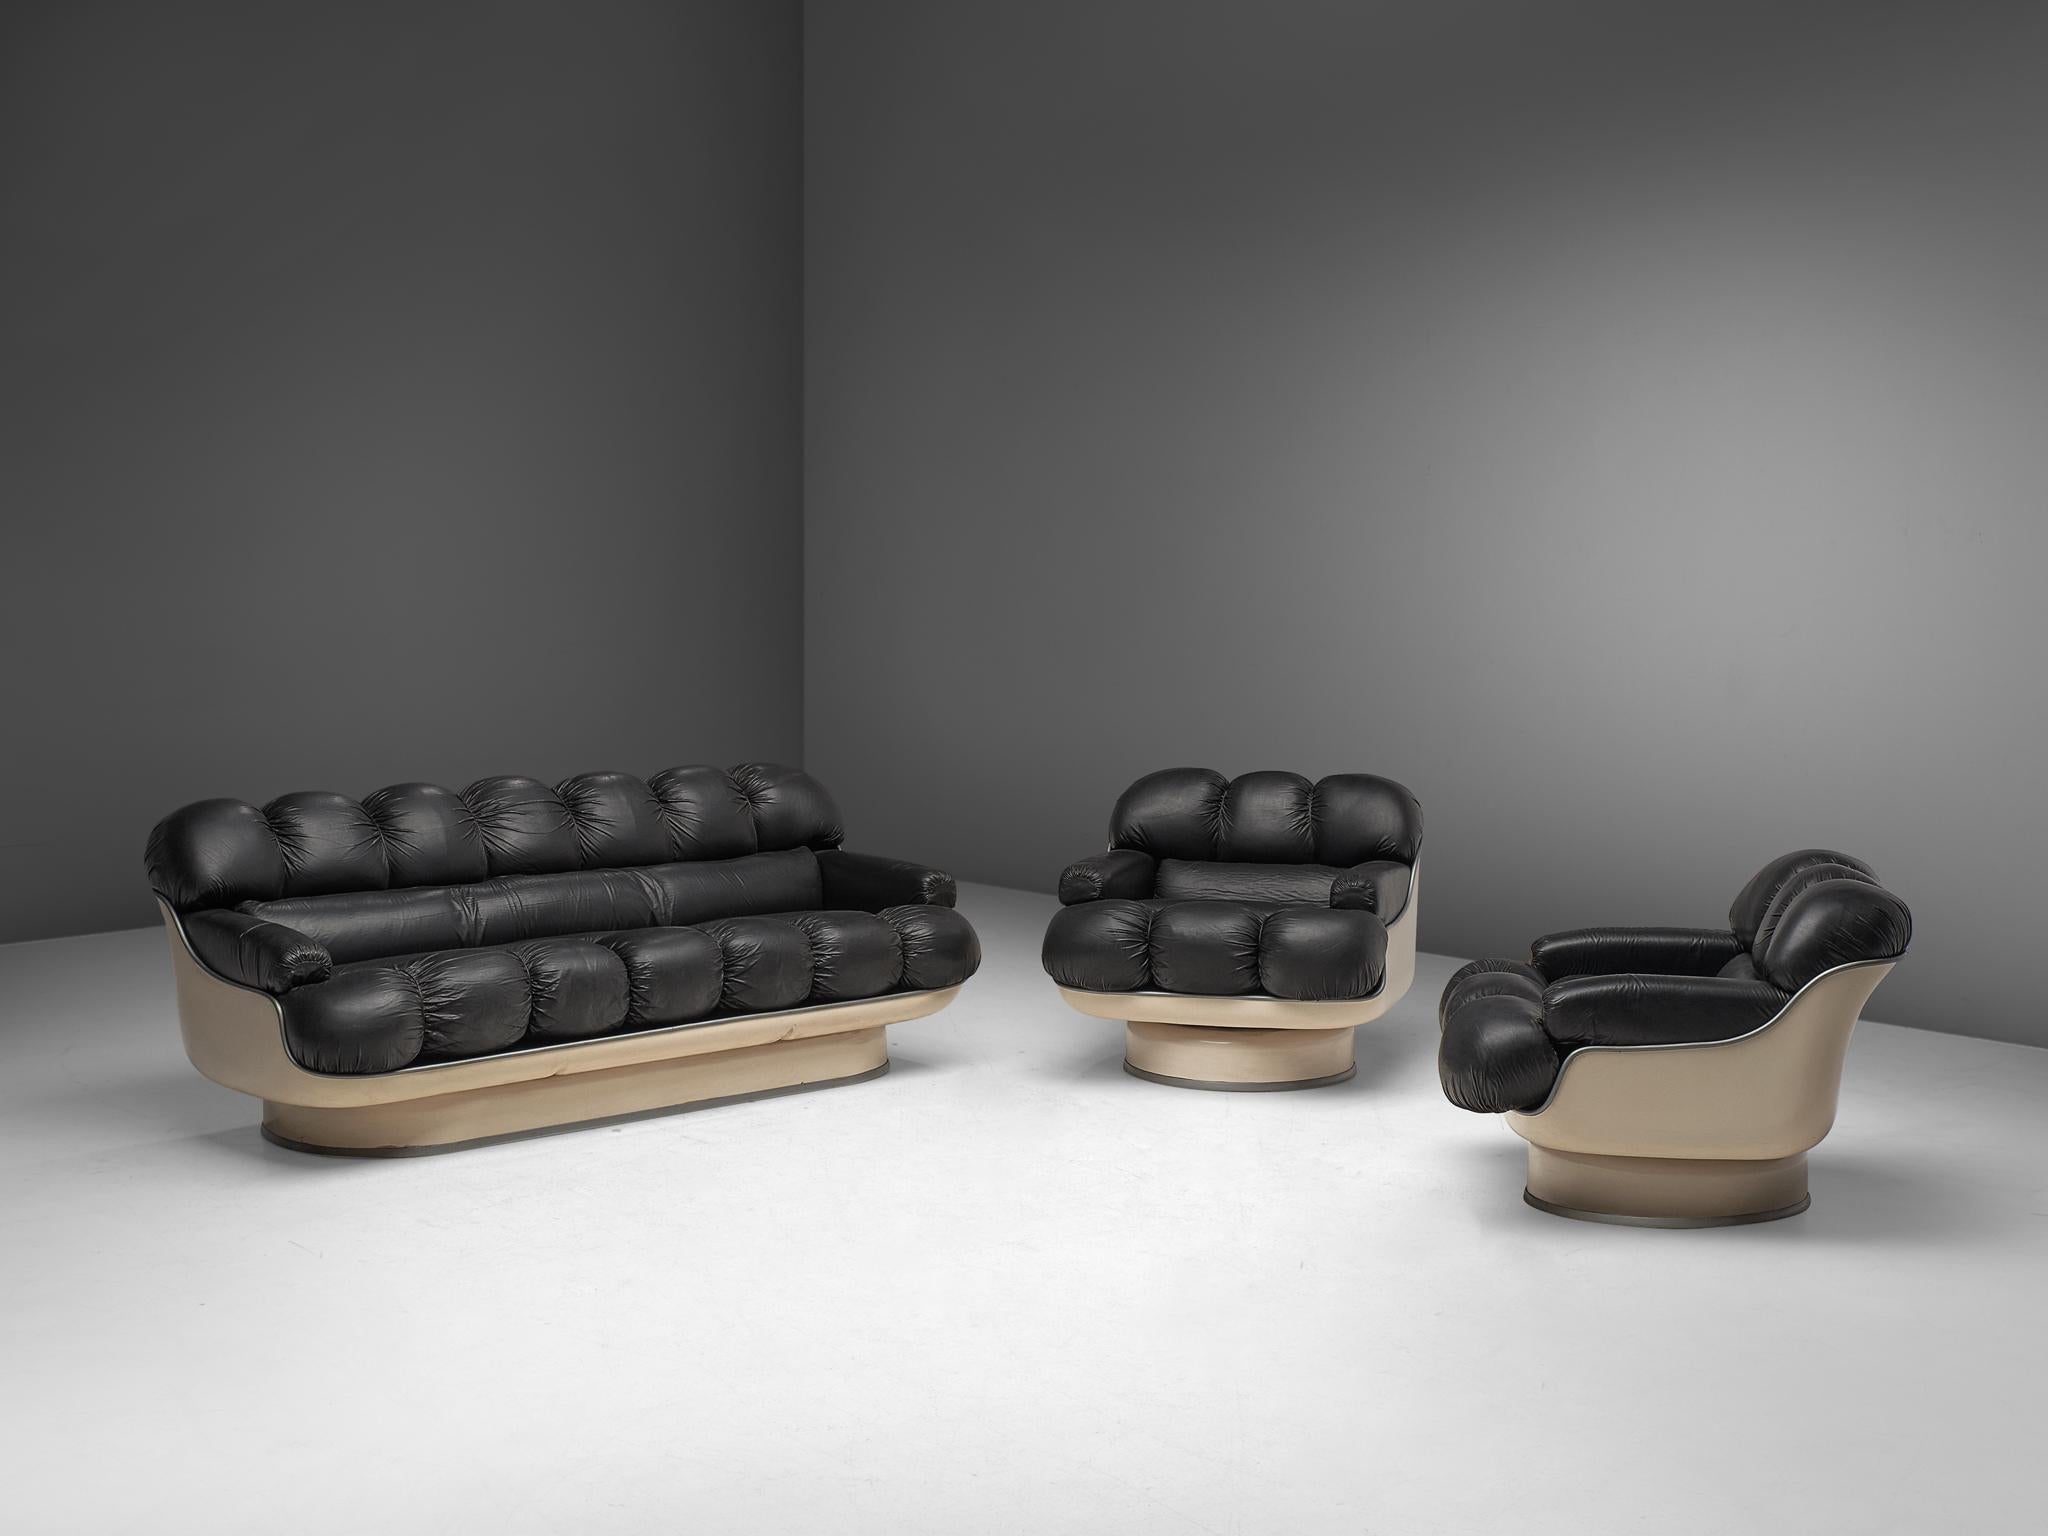 Lounge set, fiberglass and leatherette, France, late 1970s.

This highly comfortable living room set, consisting of one sofa and two lounge chairs, has a very soft and inviting appearance. Executed in off white fiberglass and black leatherette.